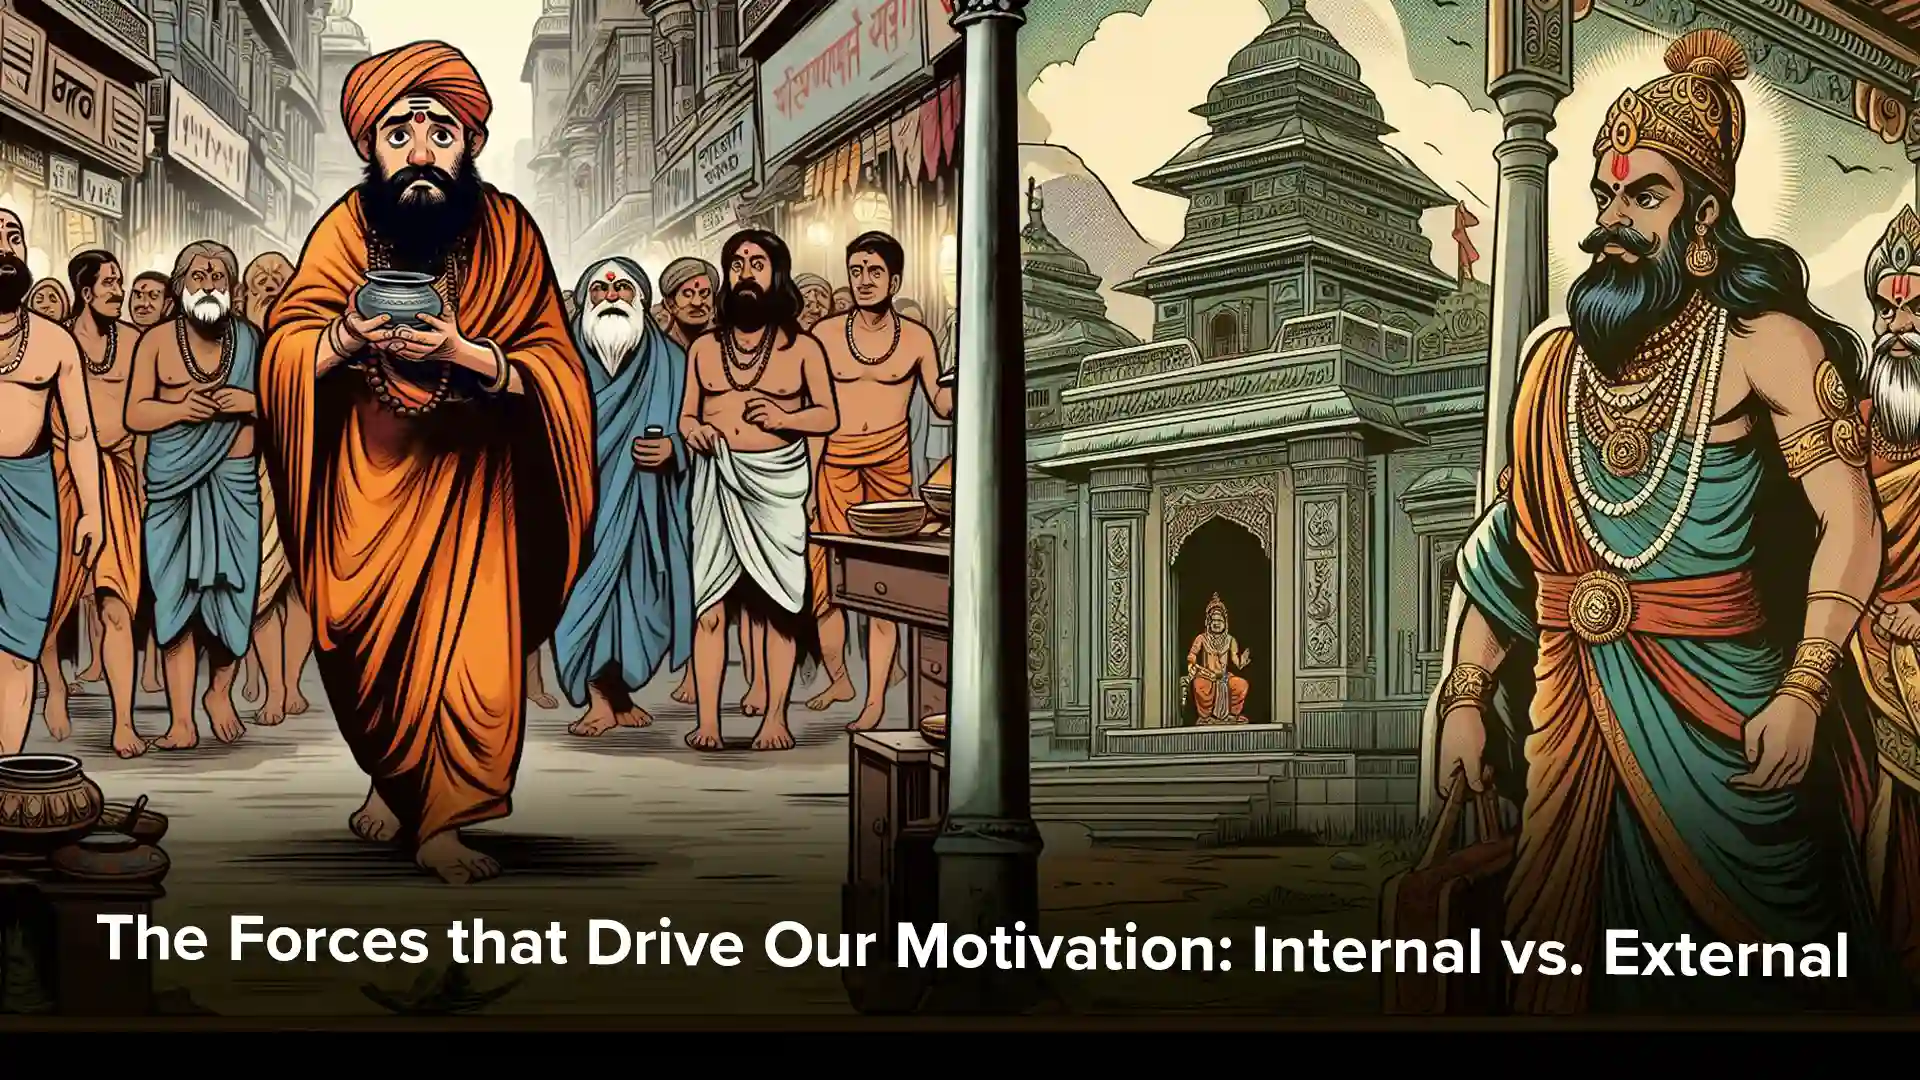 The Two Forces that Drive Our Motivation: Internal vs. External